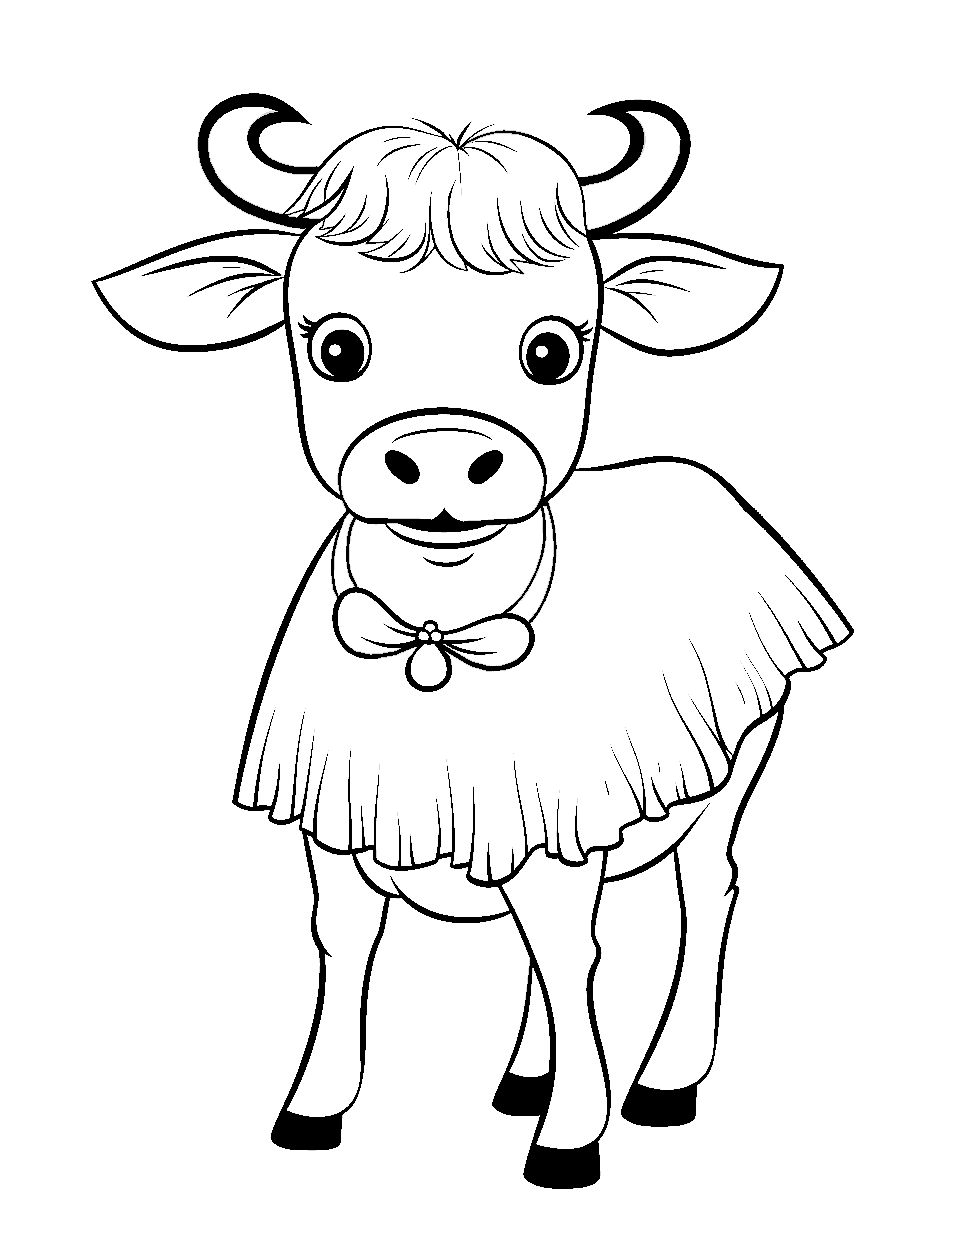 Tutu-Wearing Bovine Coloring Page - A cow donning a cute tutu, posing modestly amidst a blank background.